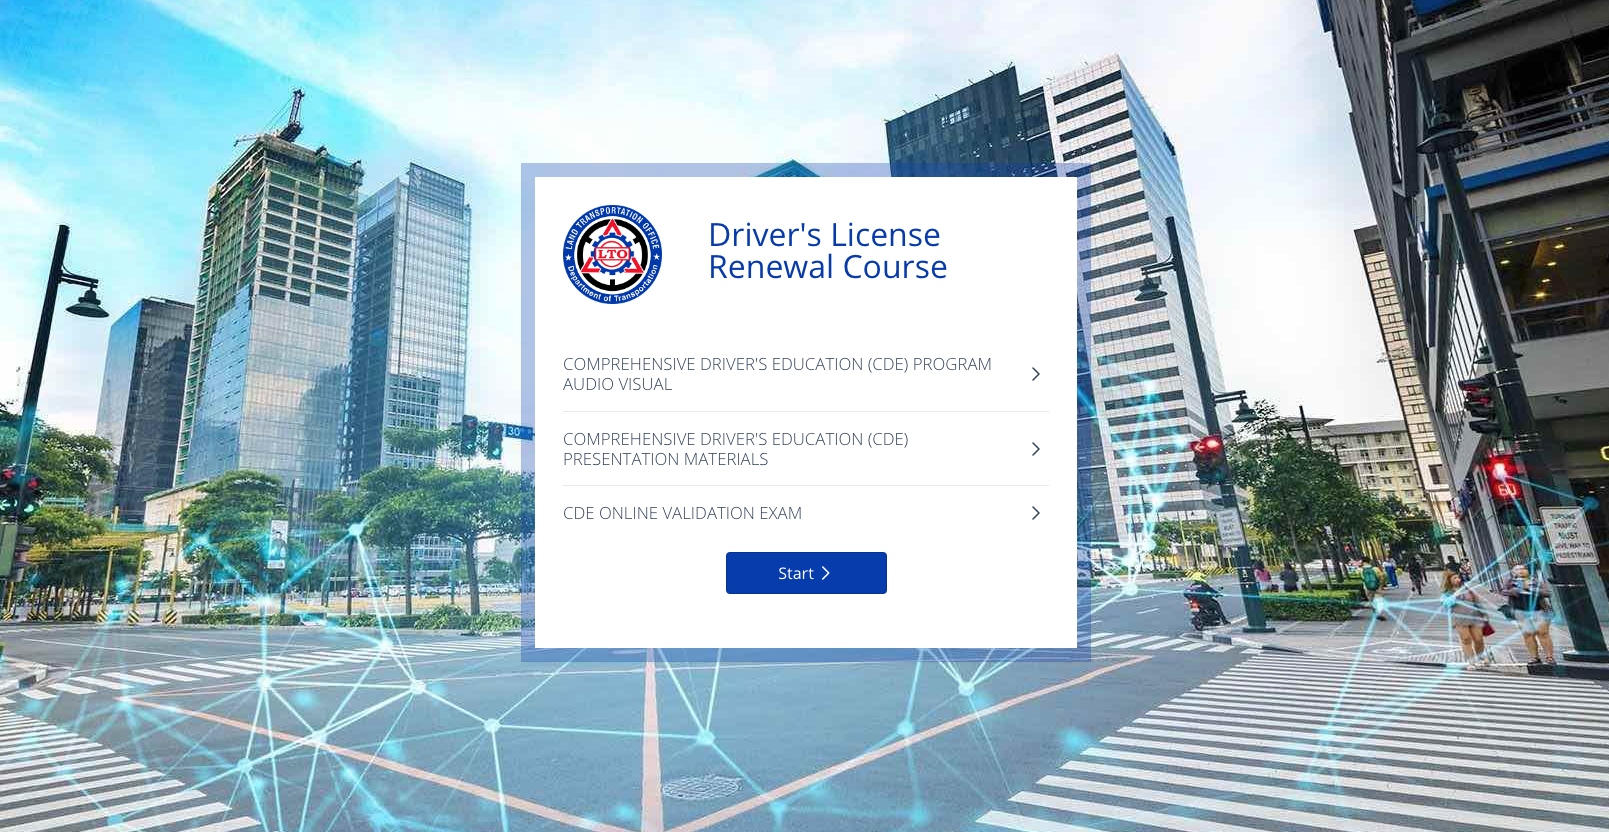 lto portal - how to access driver's license renewal course